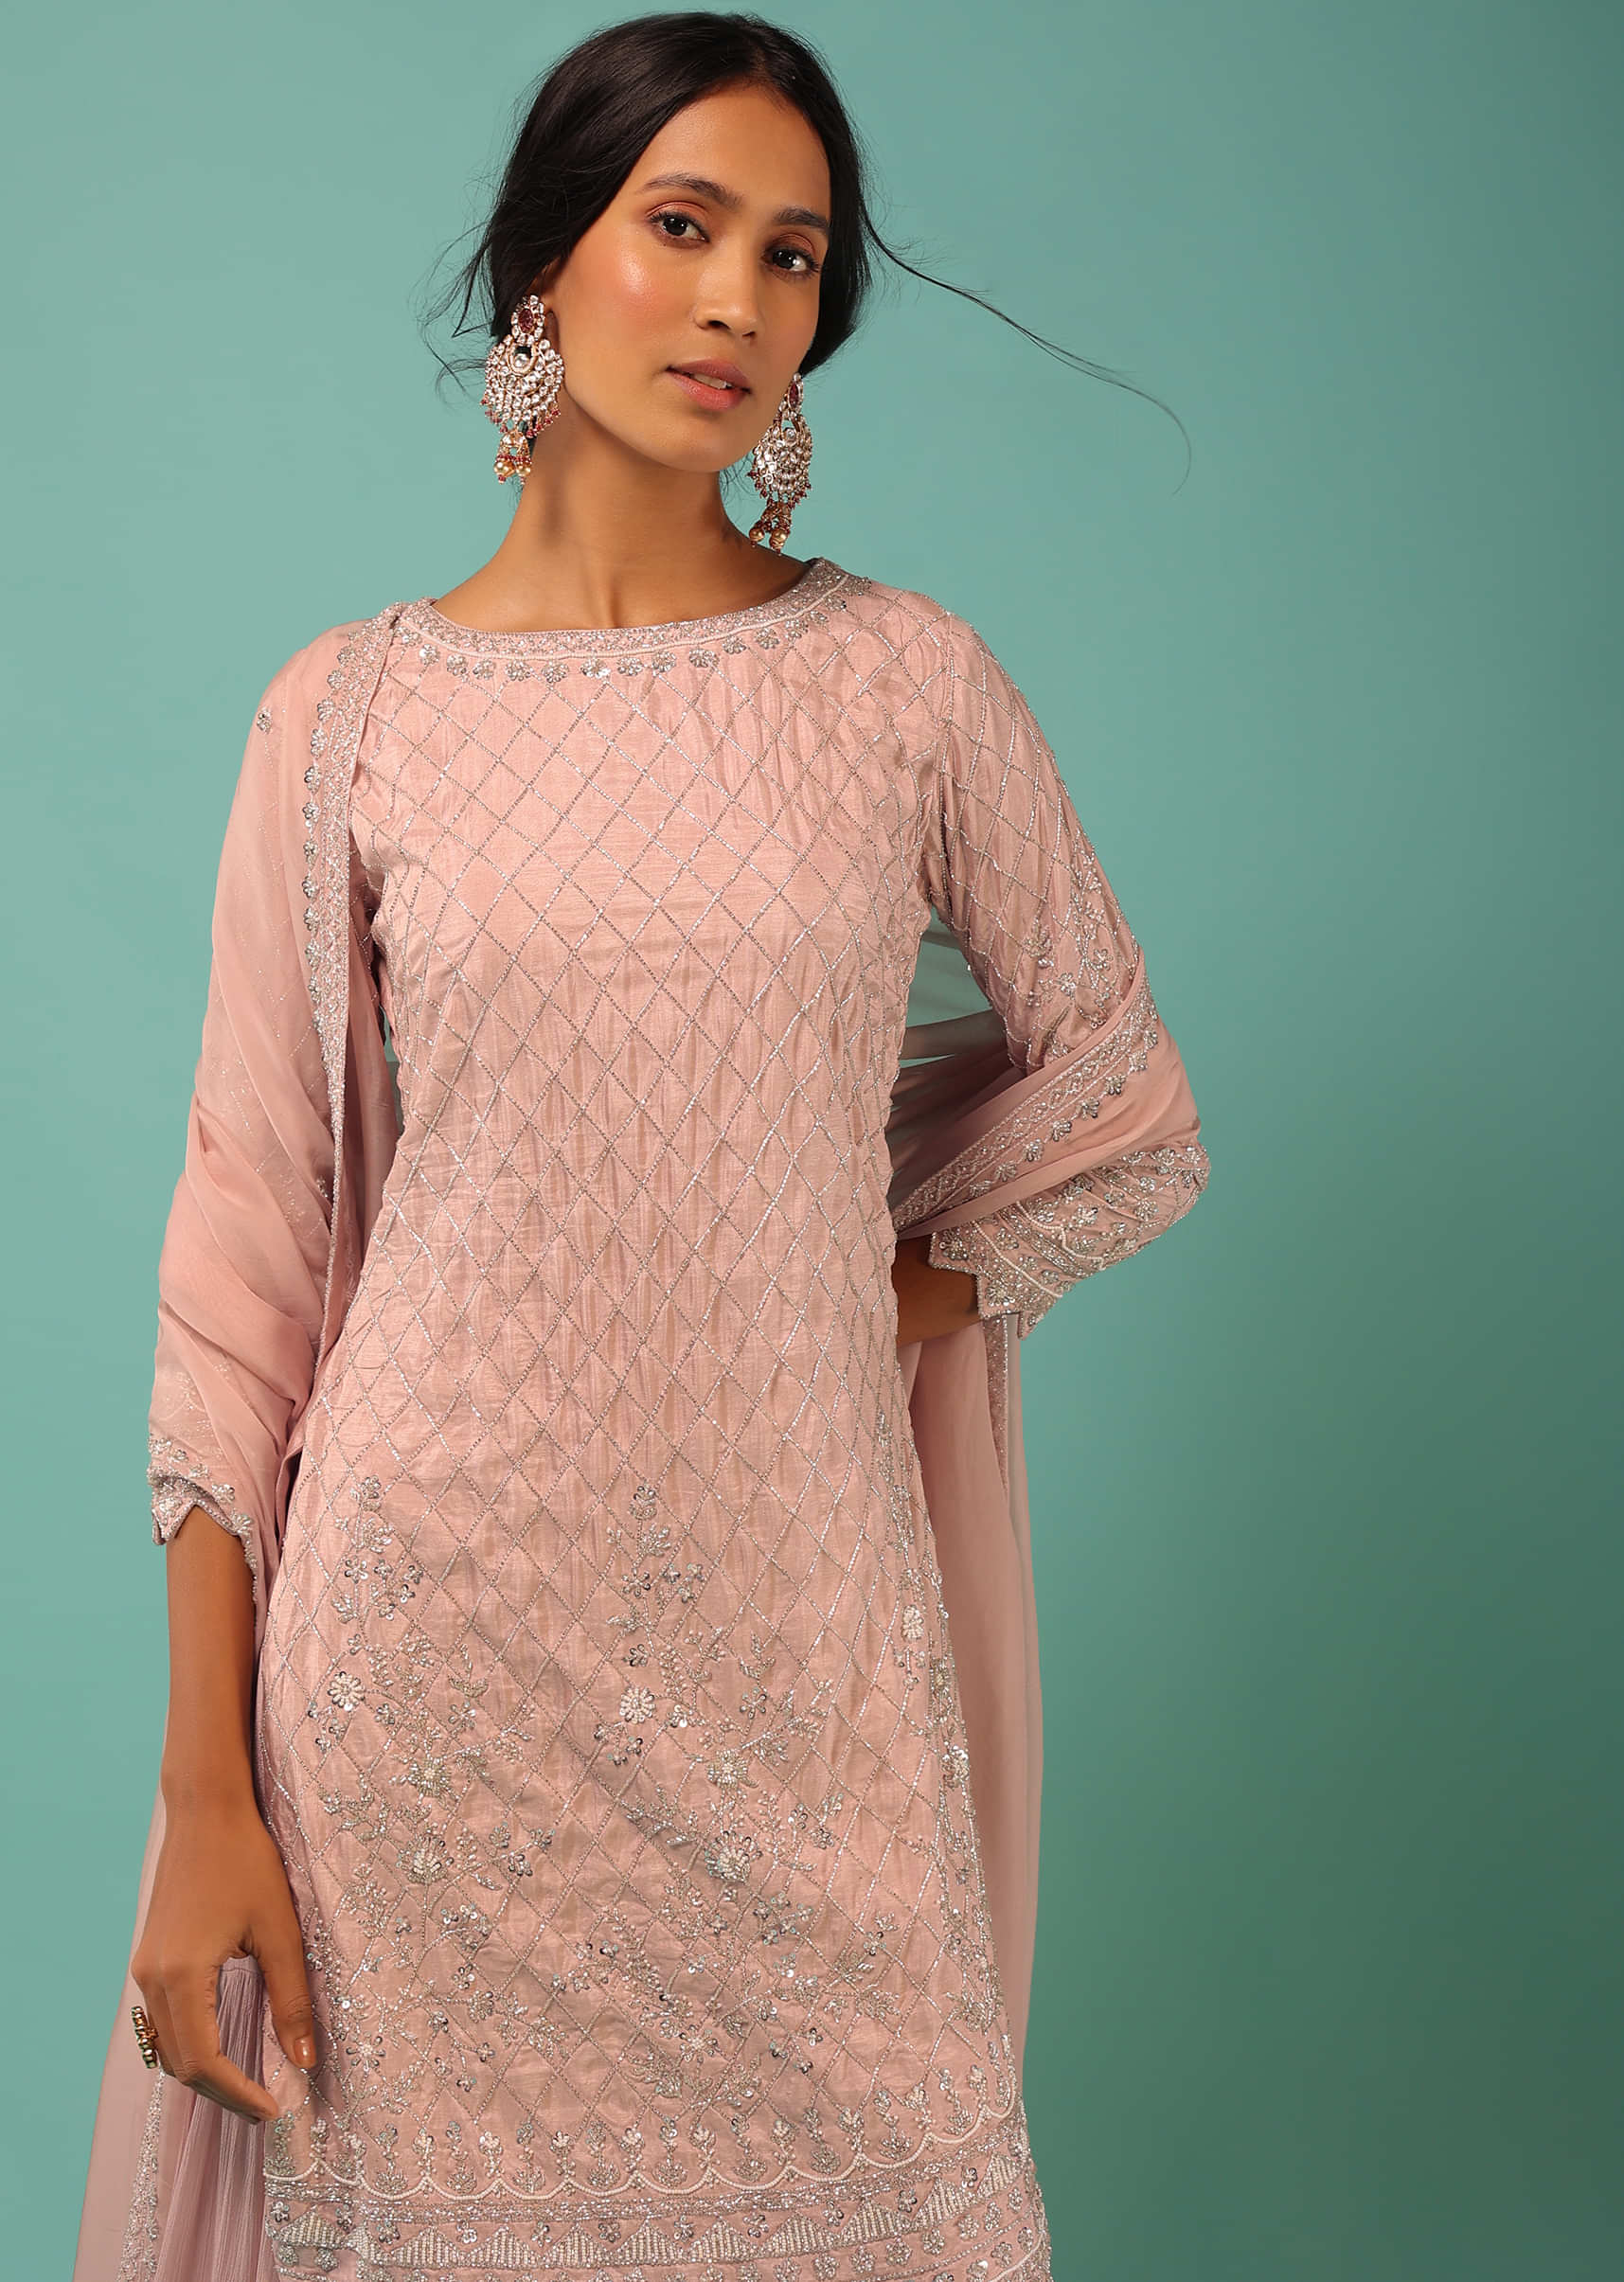 Salmon Pink Sharara Suit In Cotton Silk With Embroidered Floral Motifs